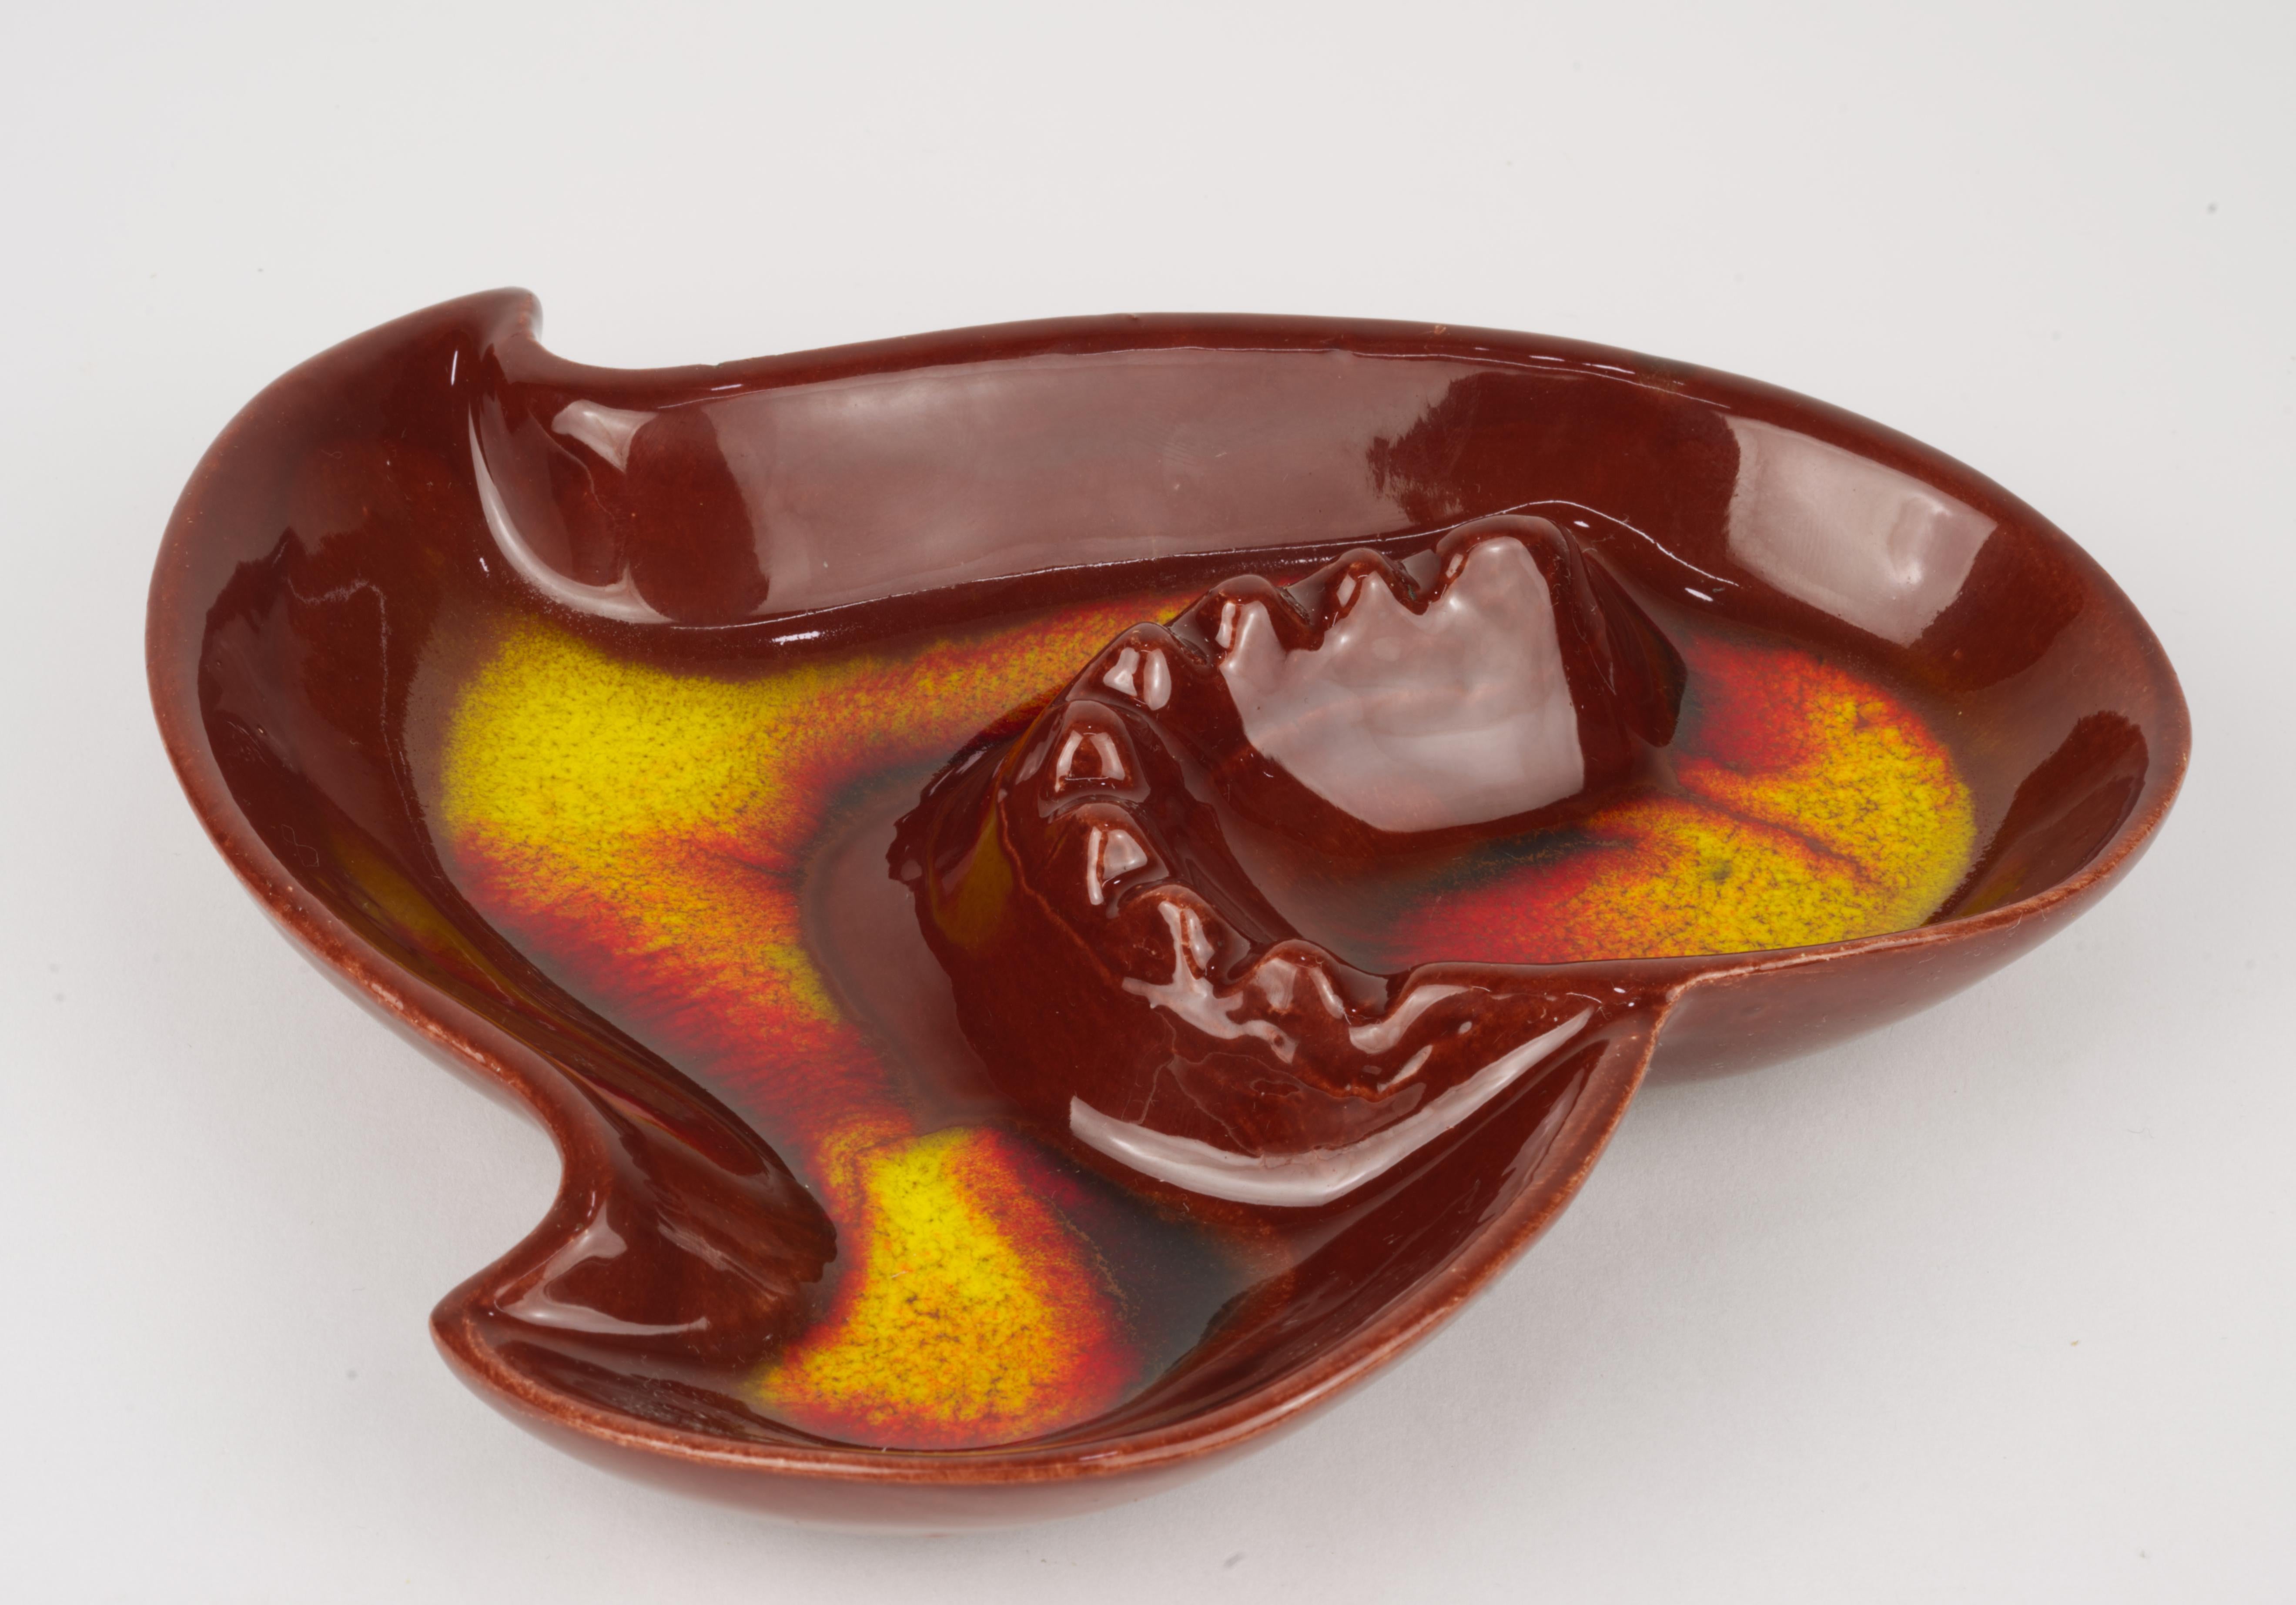 Glazed Organic Modern California Art Pottery Ashtray in Red, Orange, and Yellow For Sale